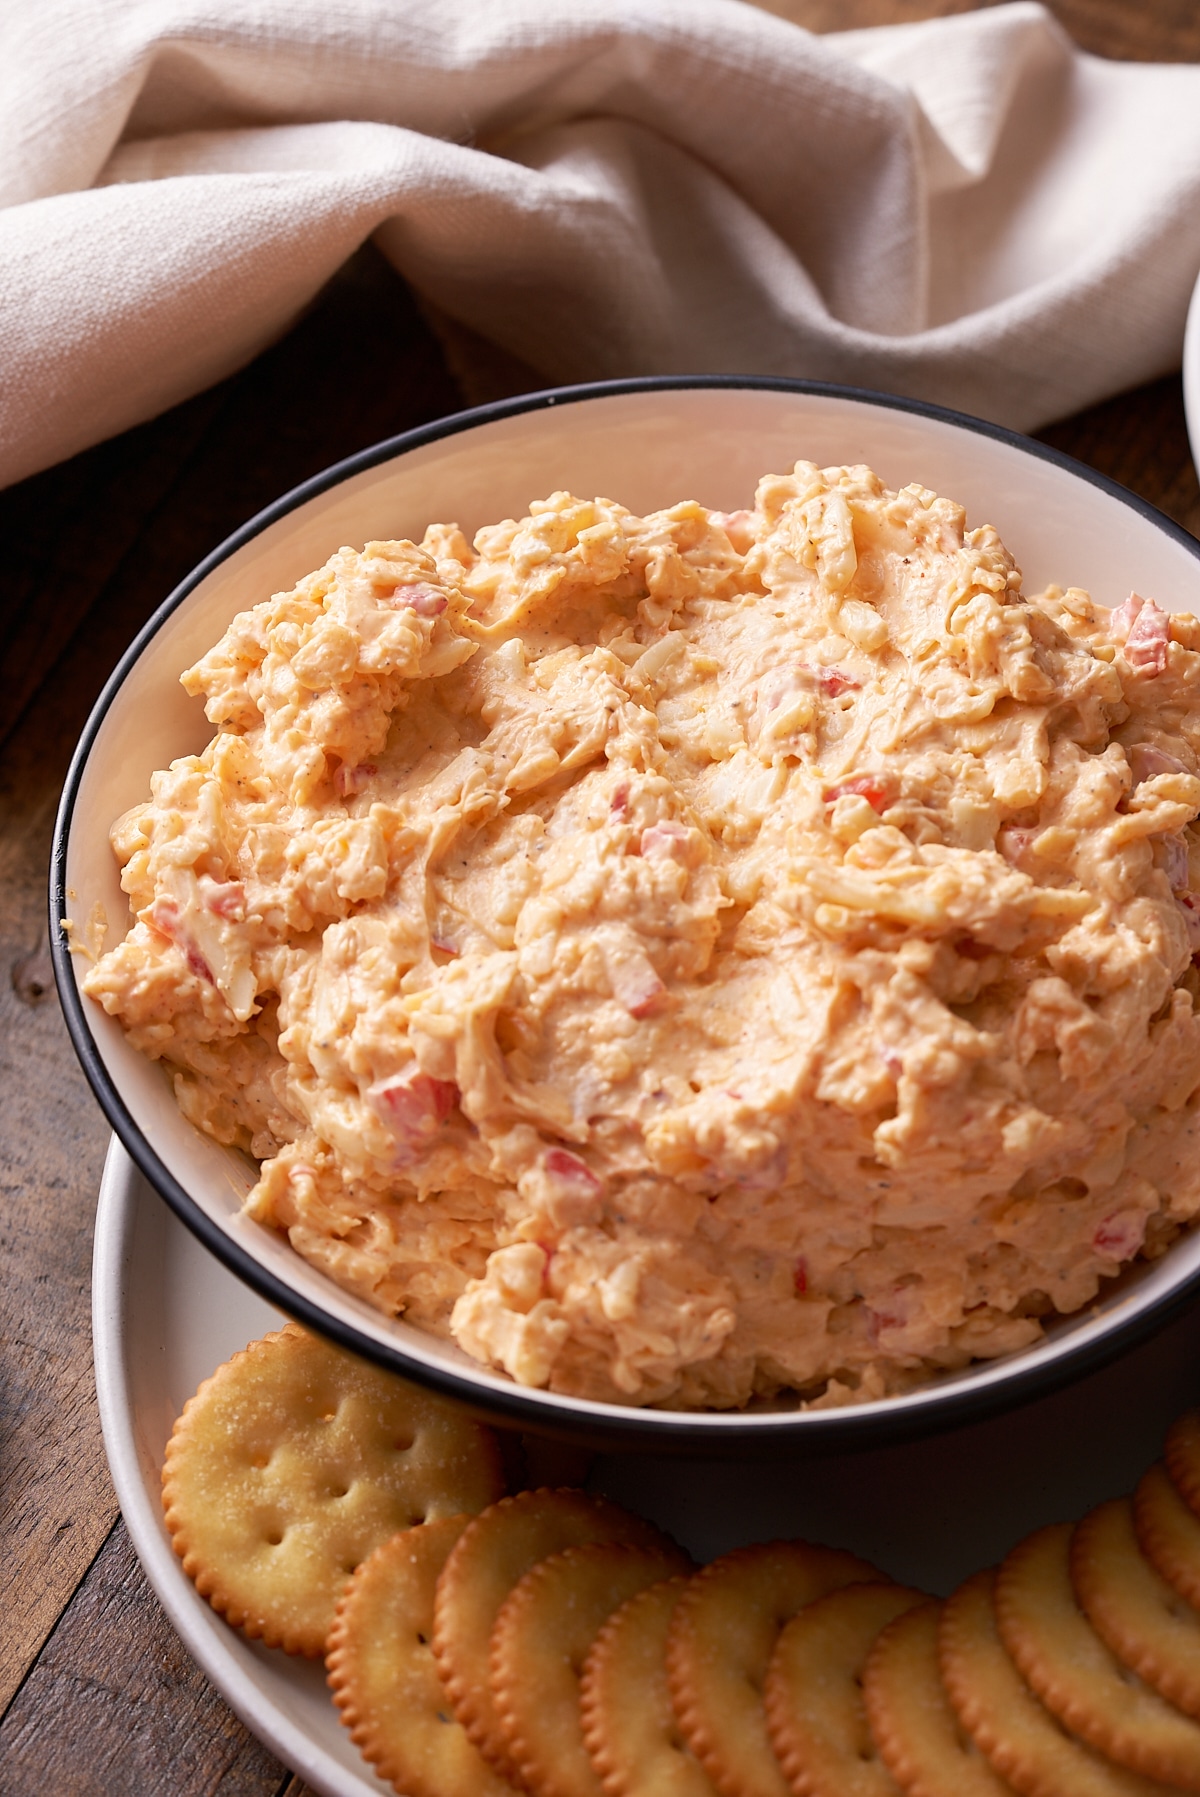 This Cheese Grater Trick Will Make Your Pimiento Cheese Recipe Even Easier